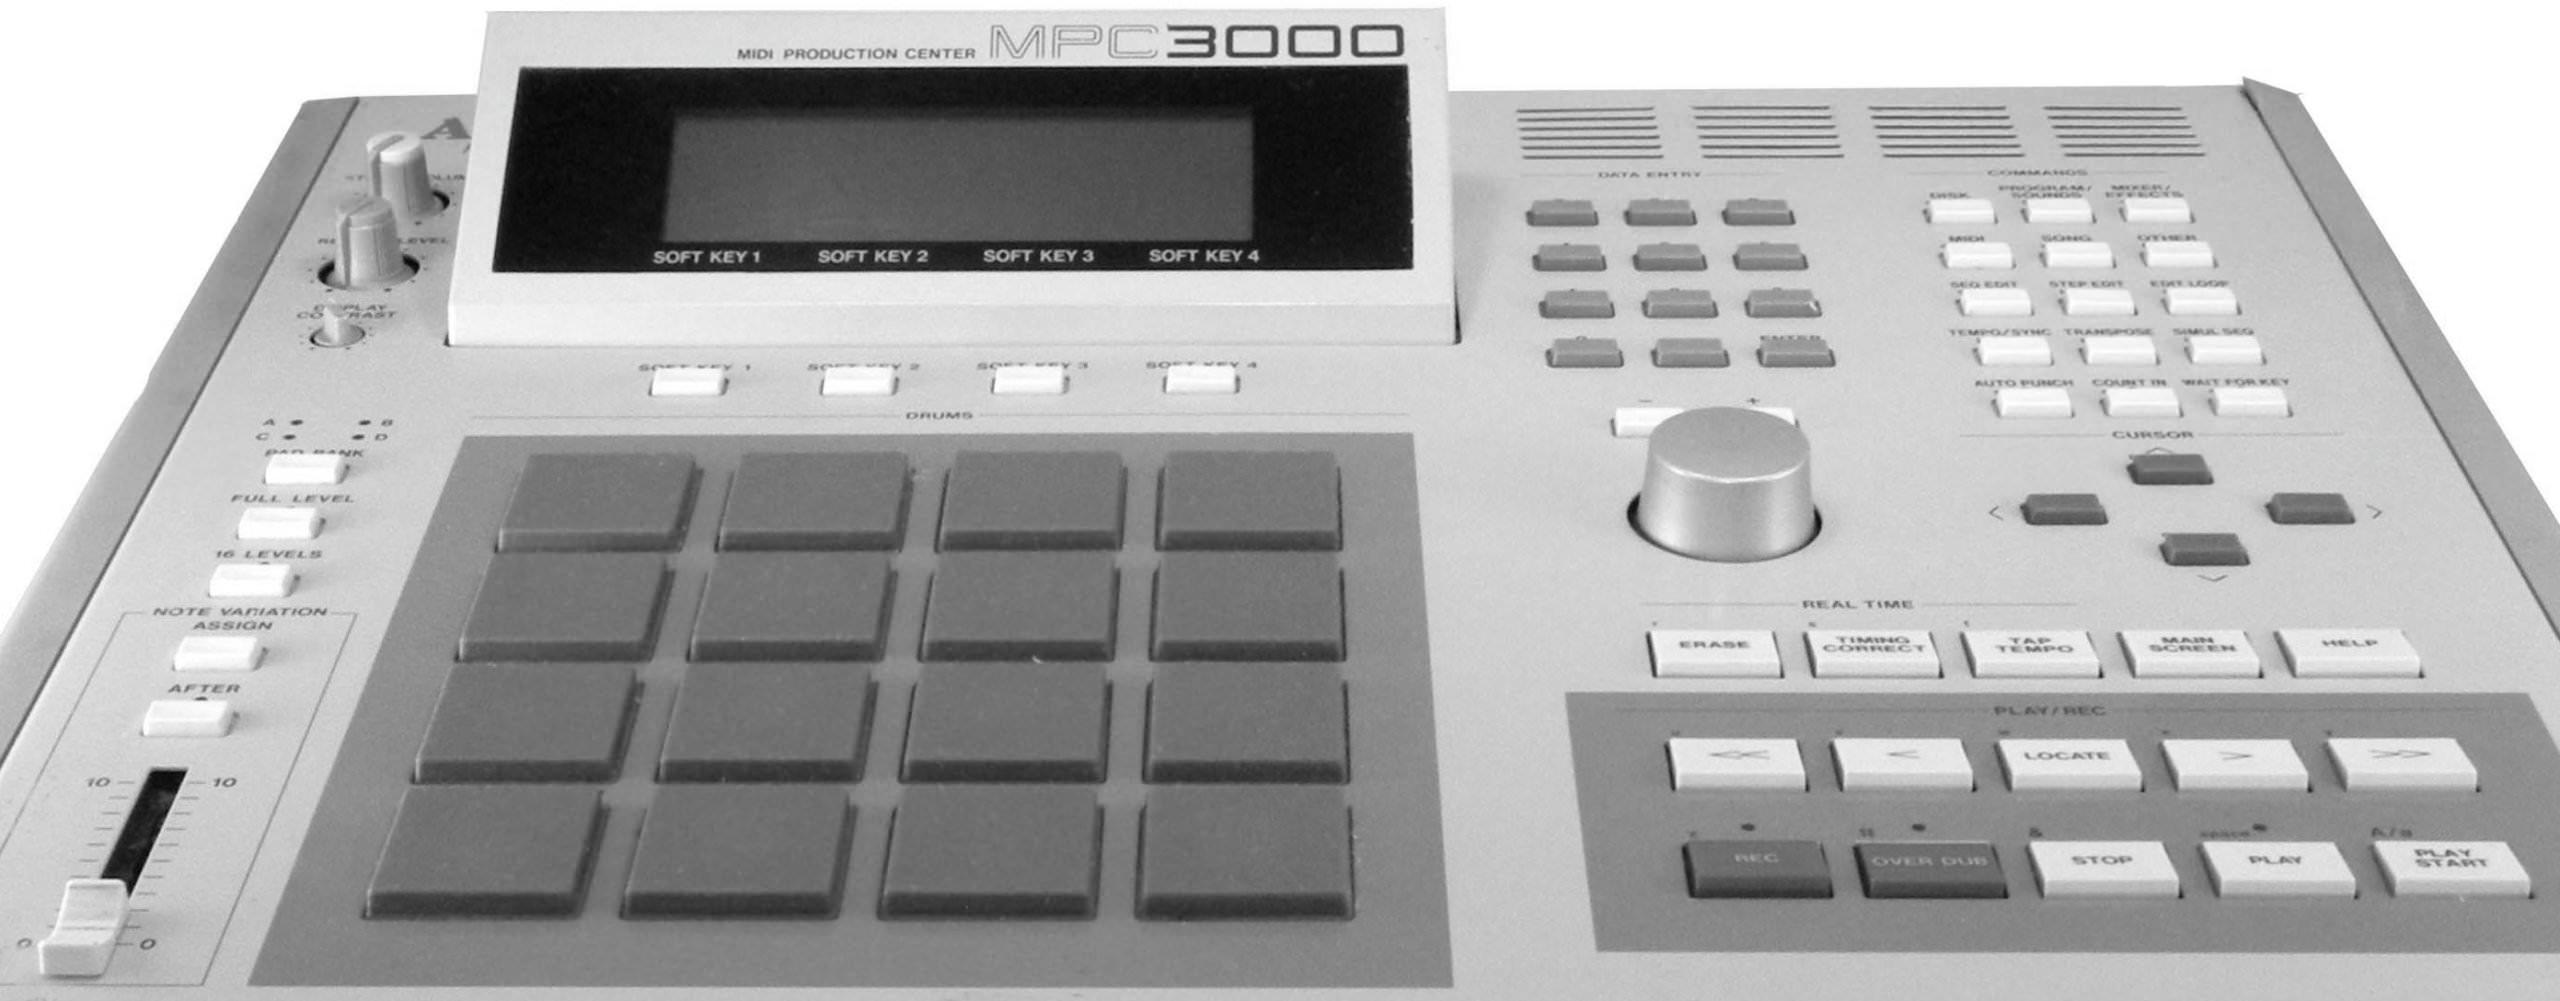 maschine the hip hop beat makers missing manual